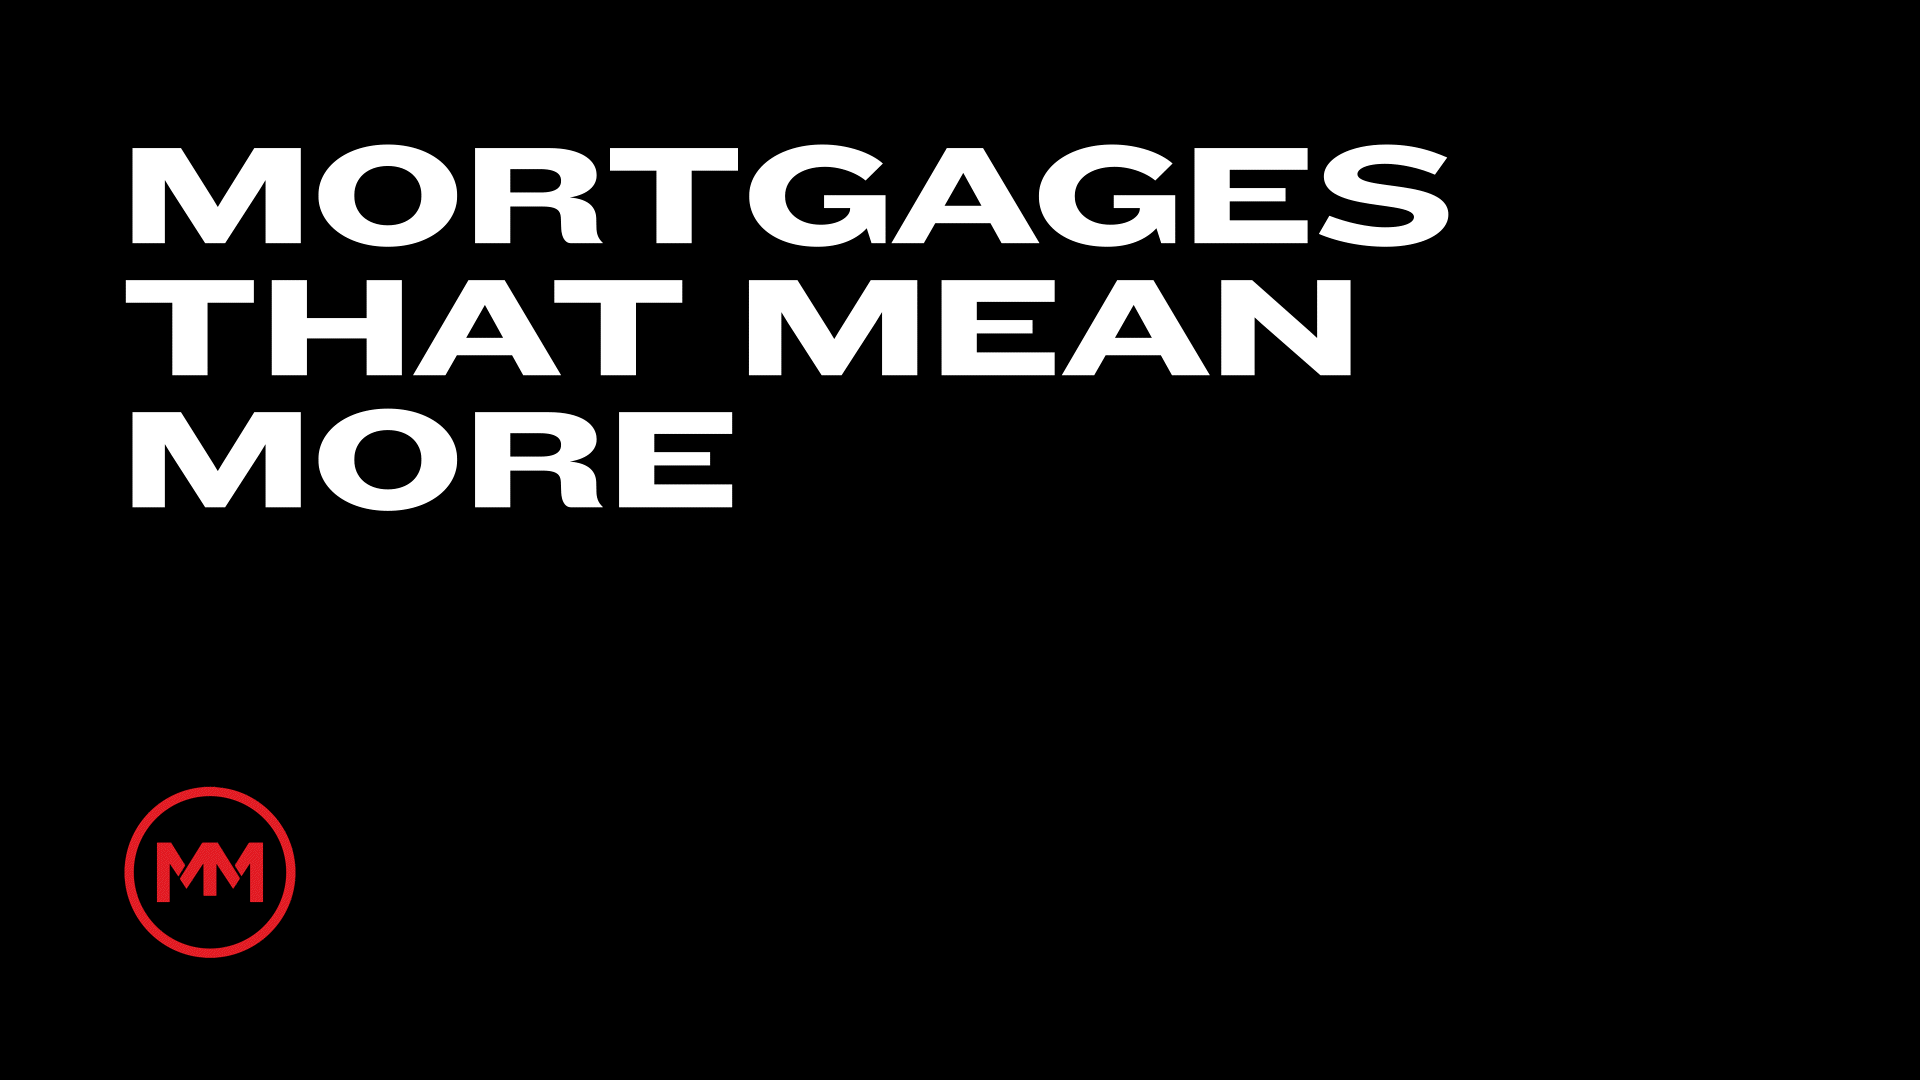 Mortgages that mean more